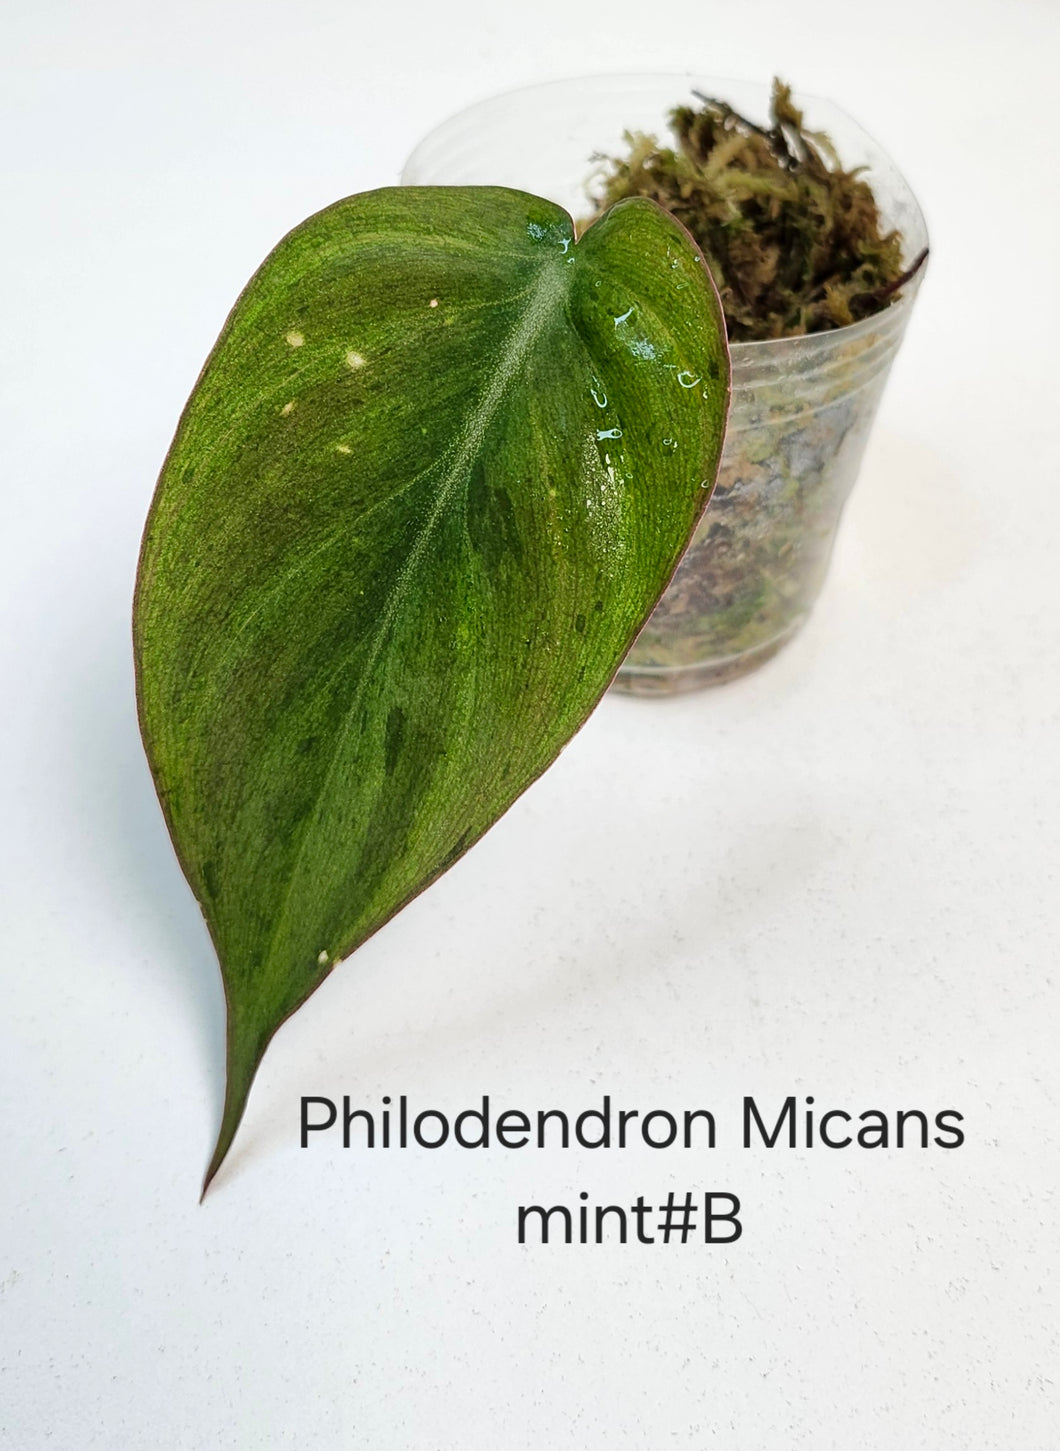 Philodendron Mican mint #B